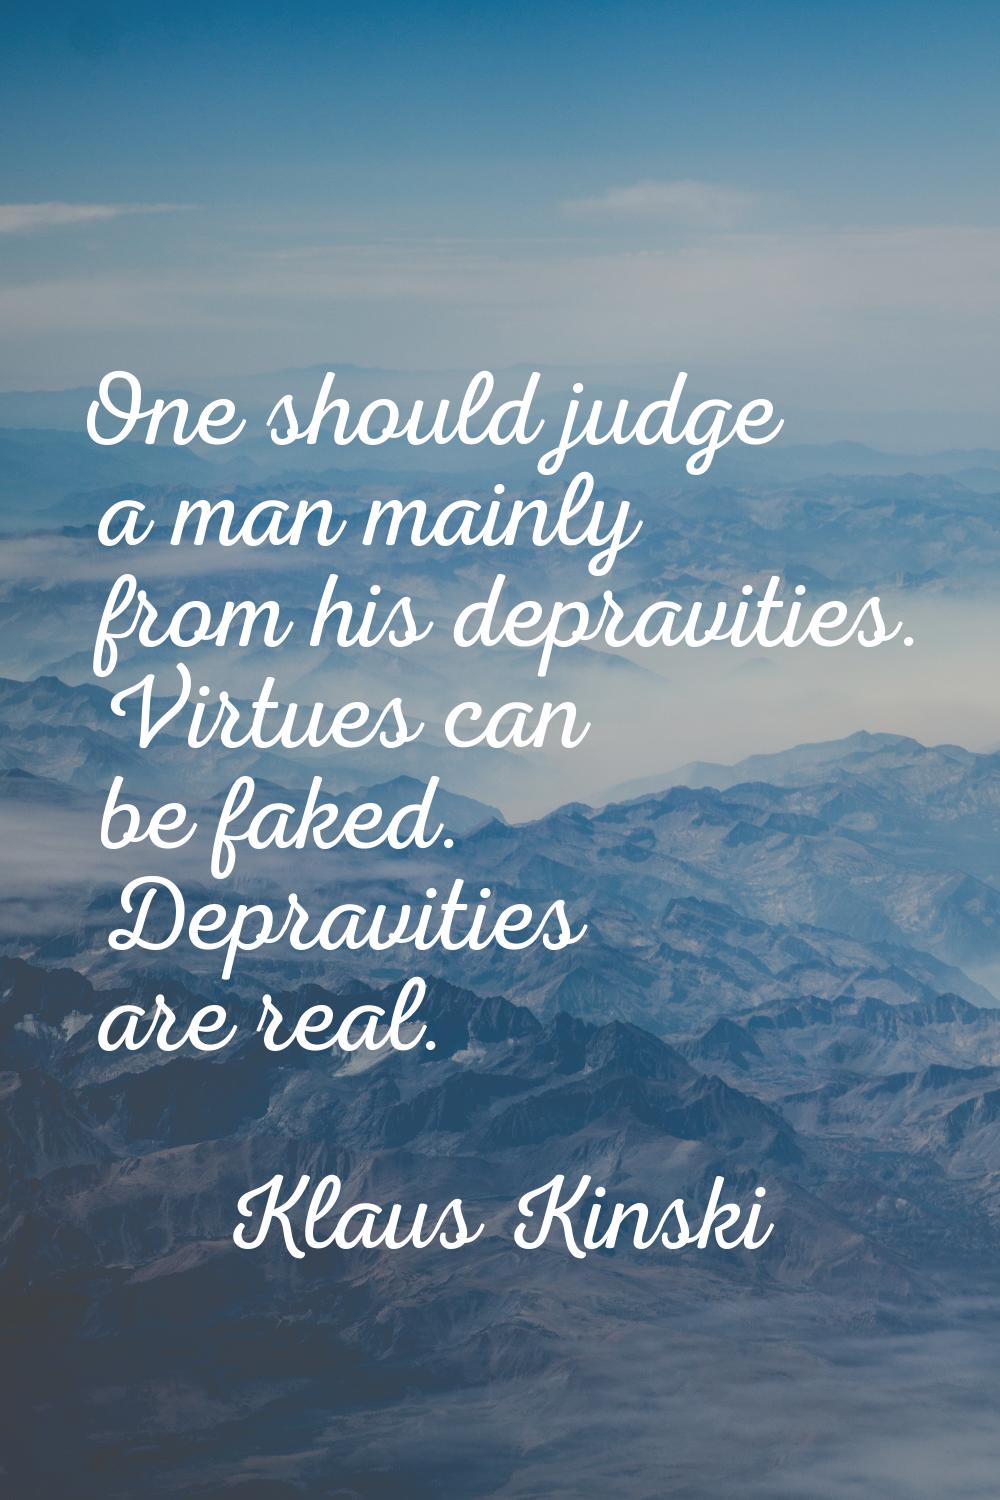 One should judge a man mainly from his depravities. Virtues can be faked. Depravities are real.